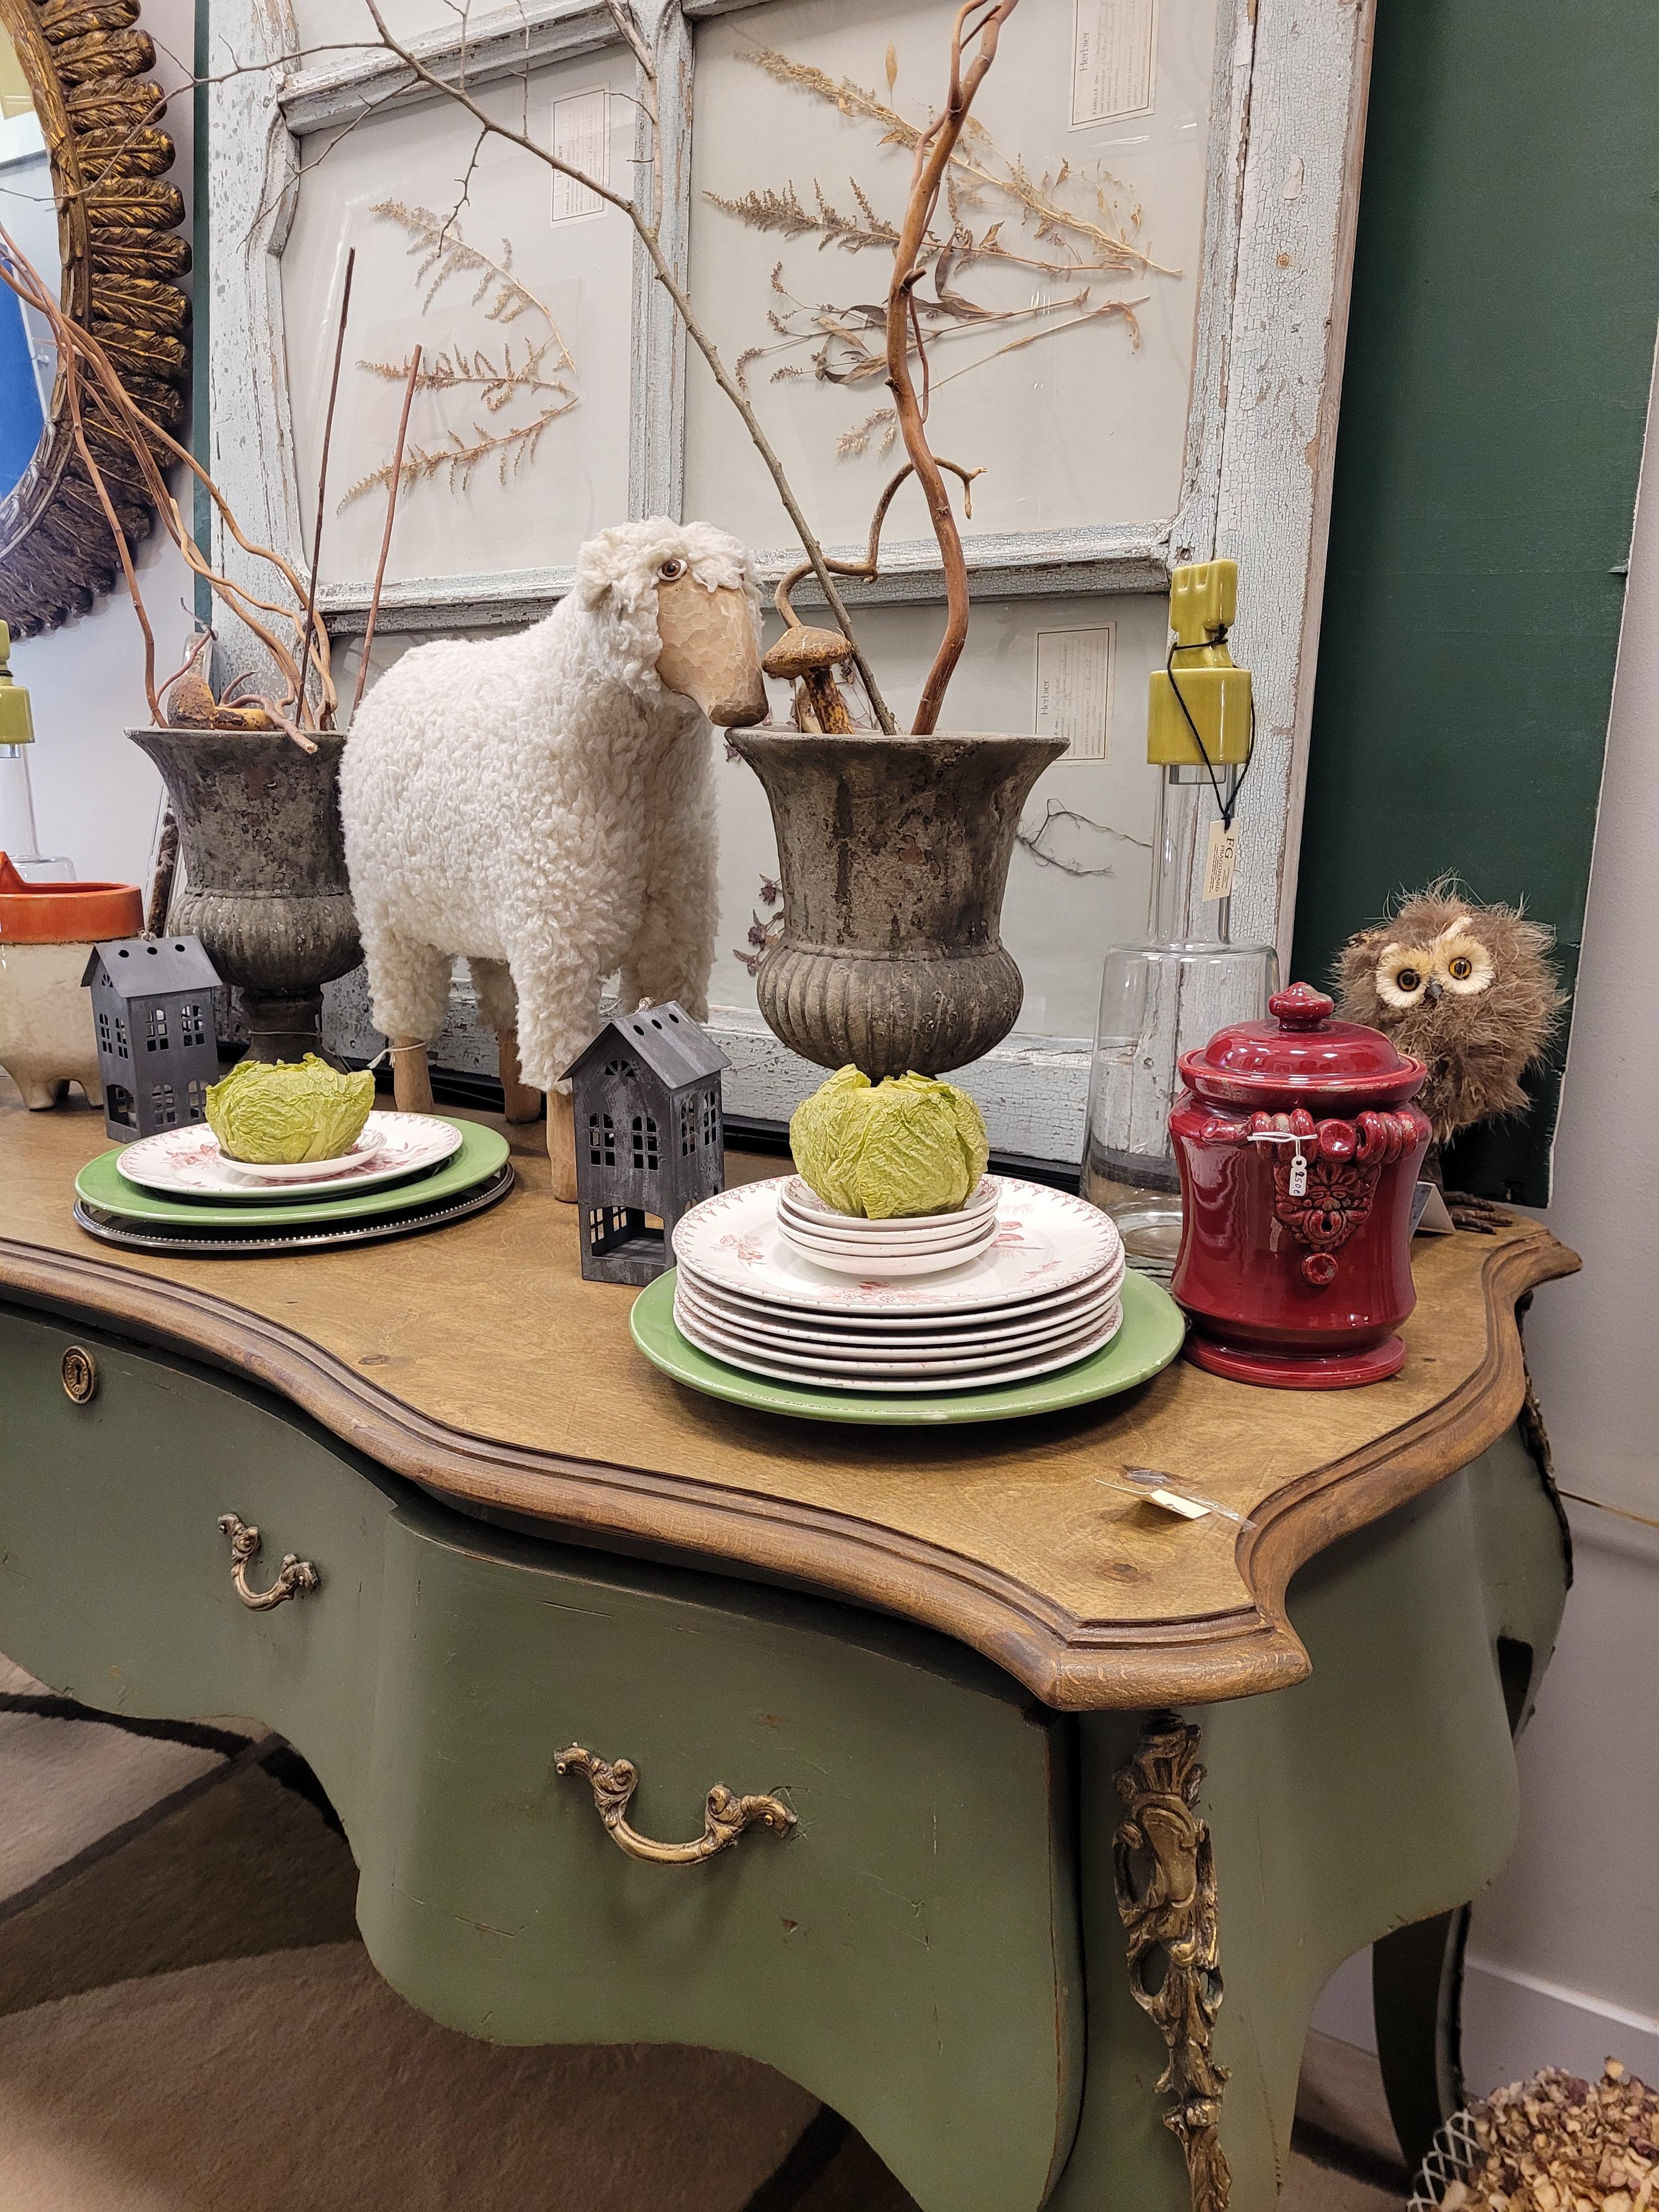 Mid-20th Century Provençal Green Center Console  table, polychrome, 50's - 60's - France For Sale